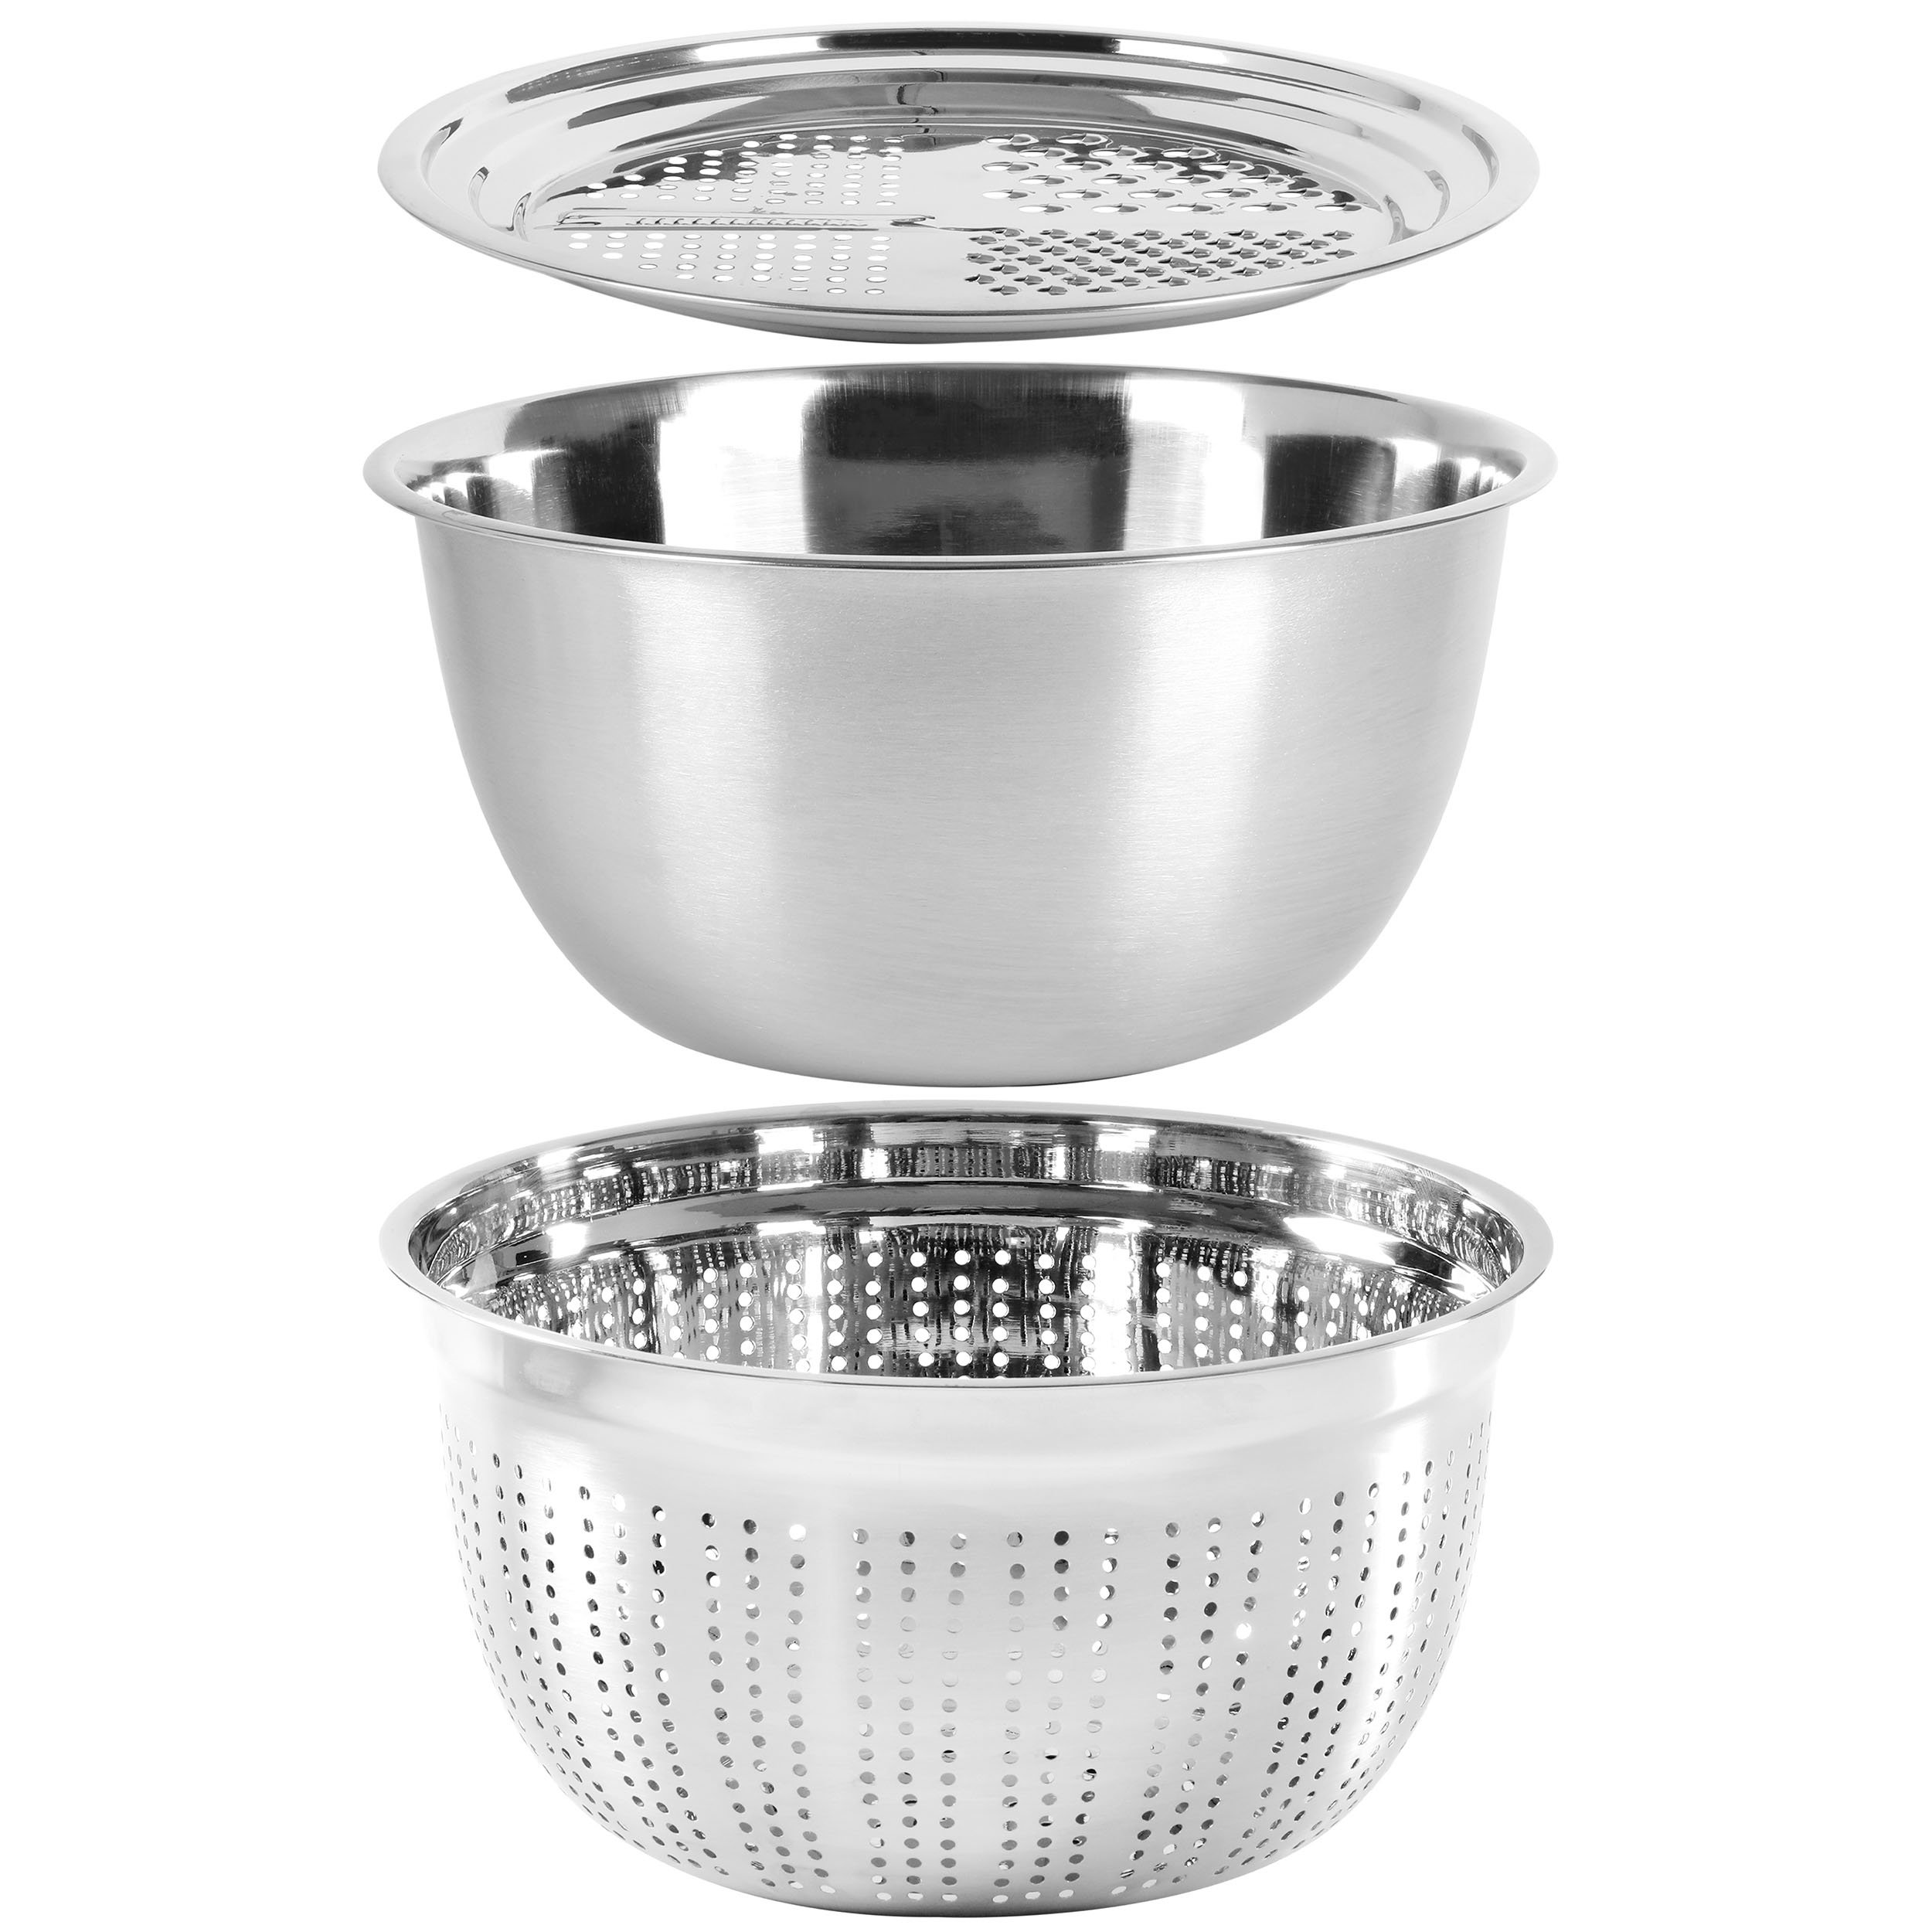 Oster 4 Piece Stainless Steel Measuring Cup Set 